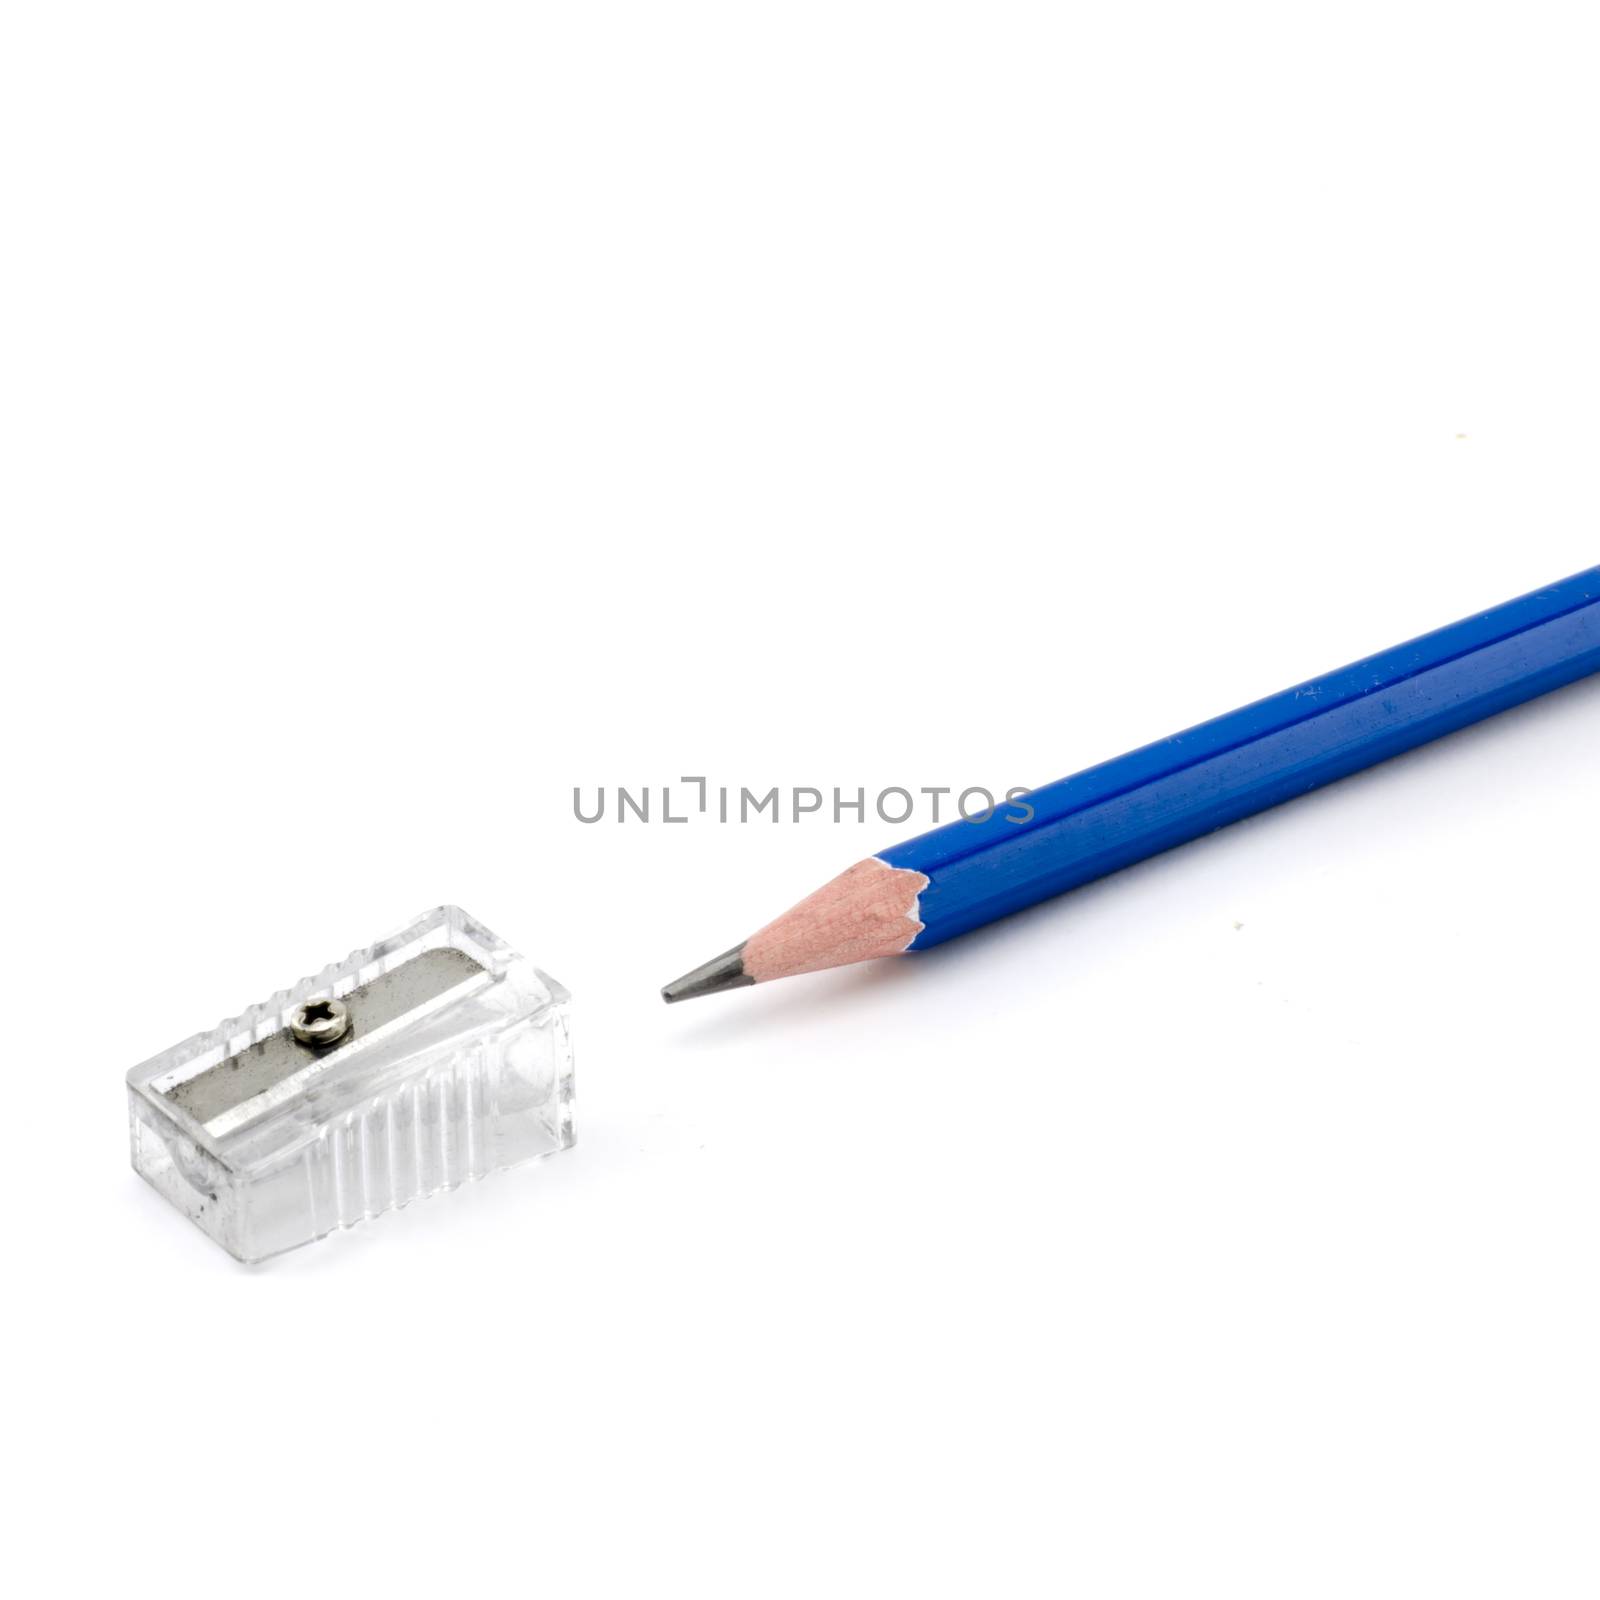 blue pencil with sharpener isolated on white background